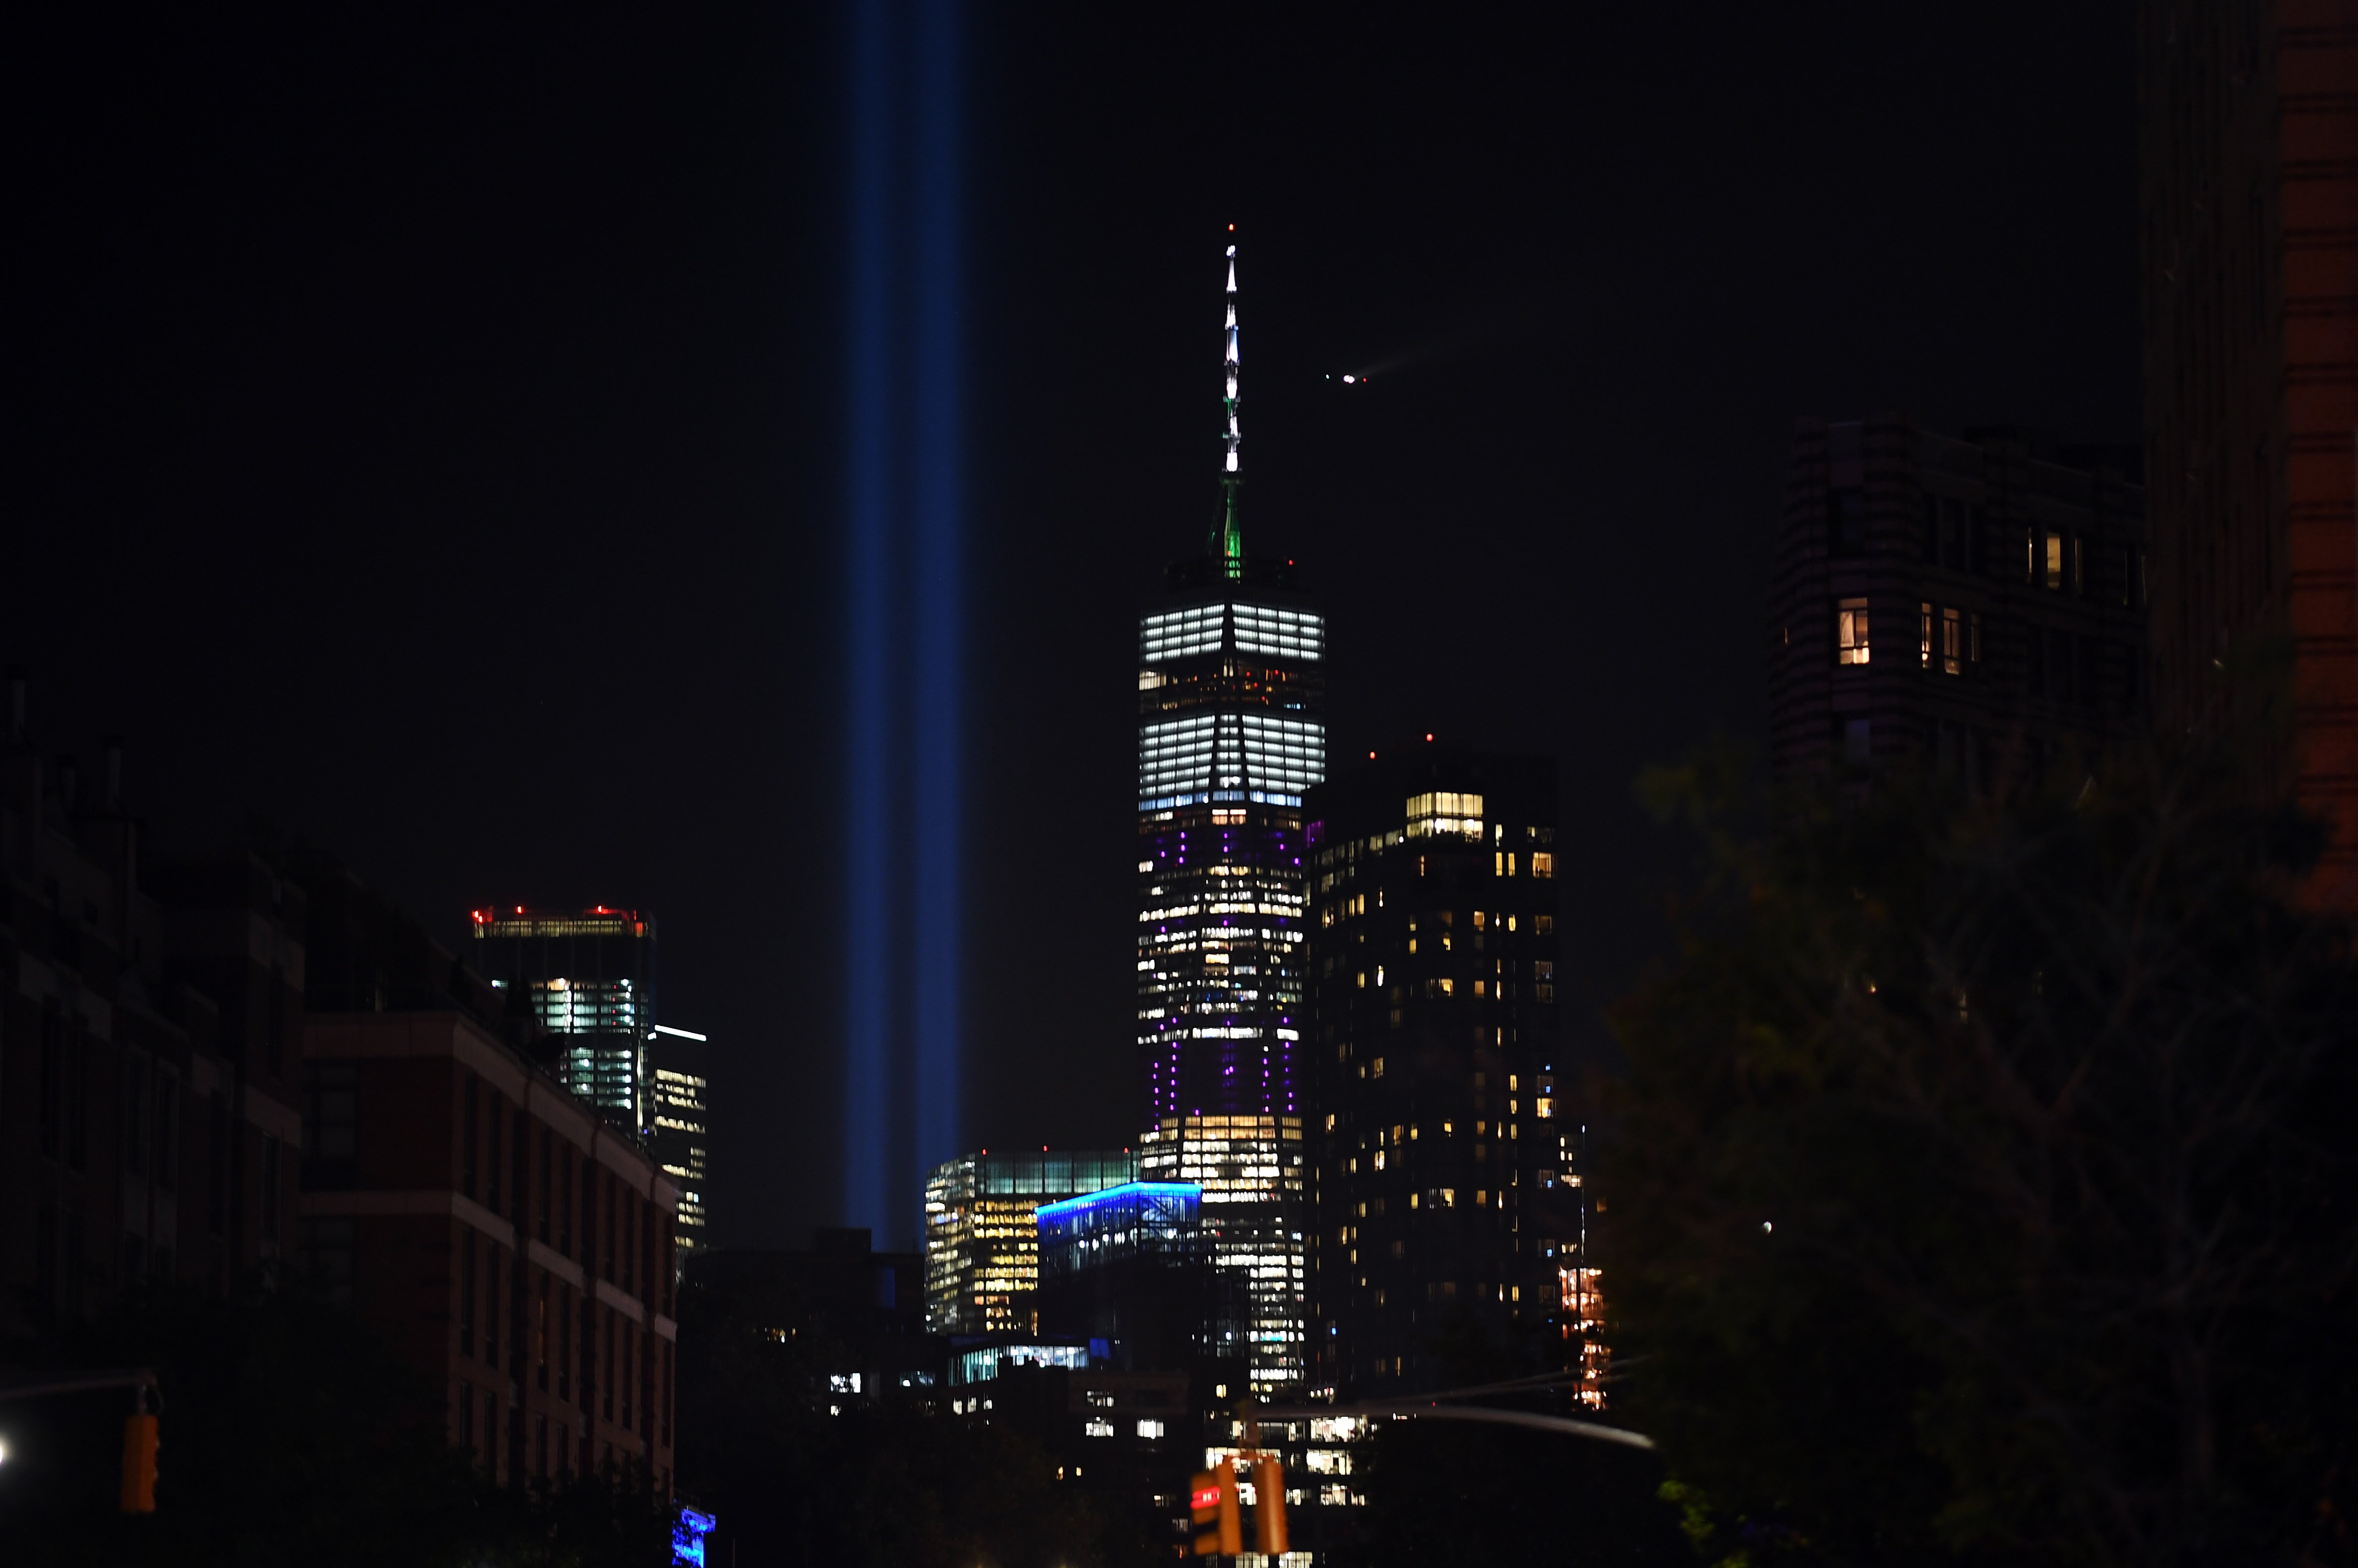 New York City pays tributes to the victims of the September 11 terrorist attacks with light beacons symbolizing the fallen towers